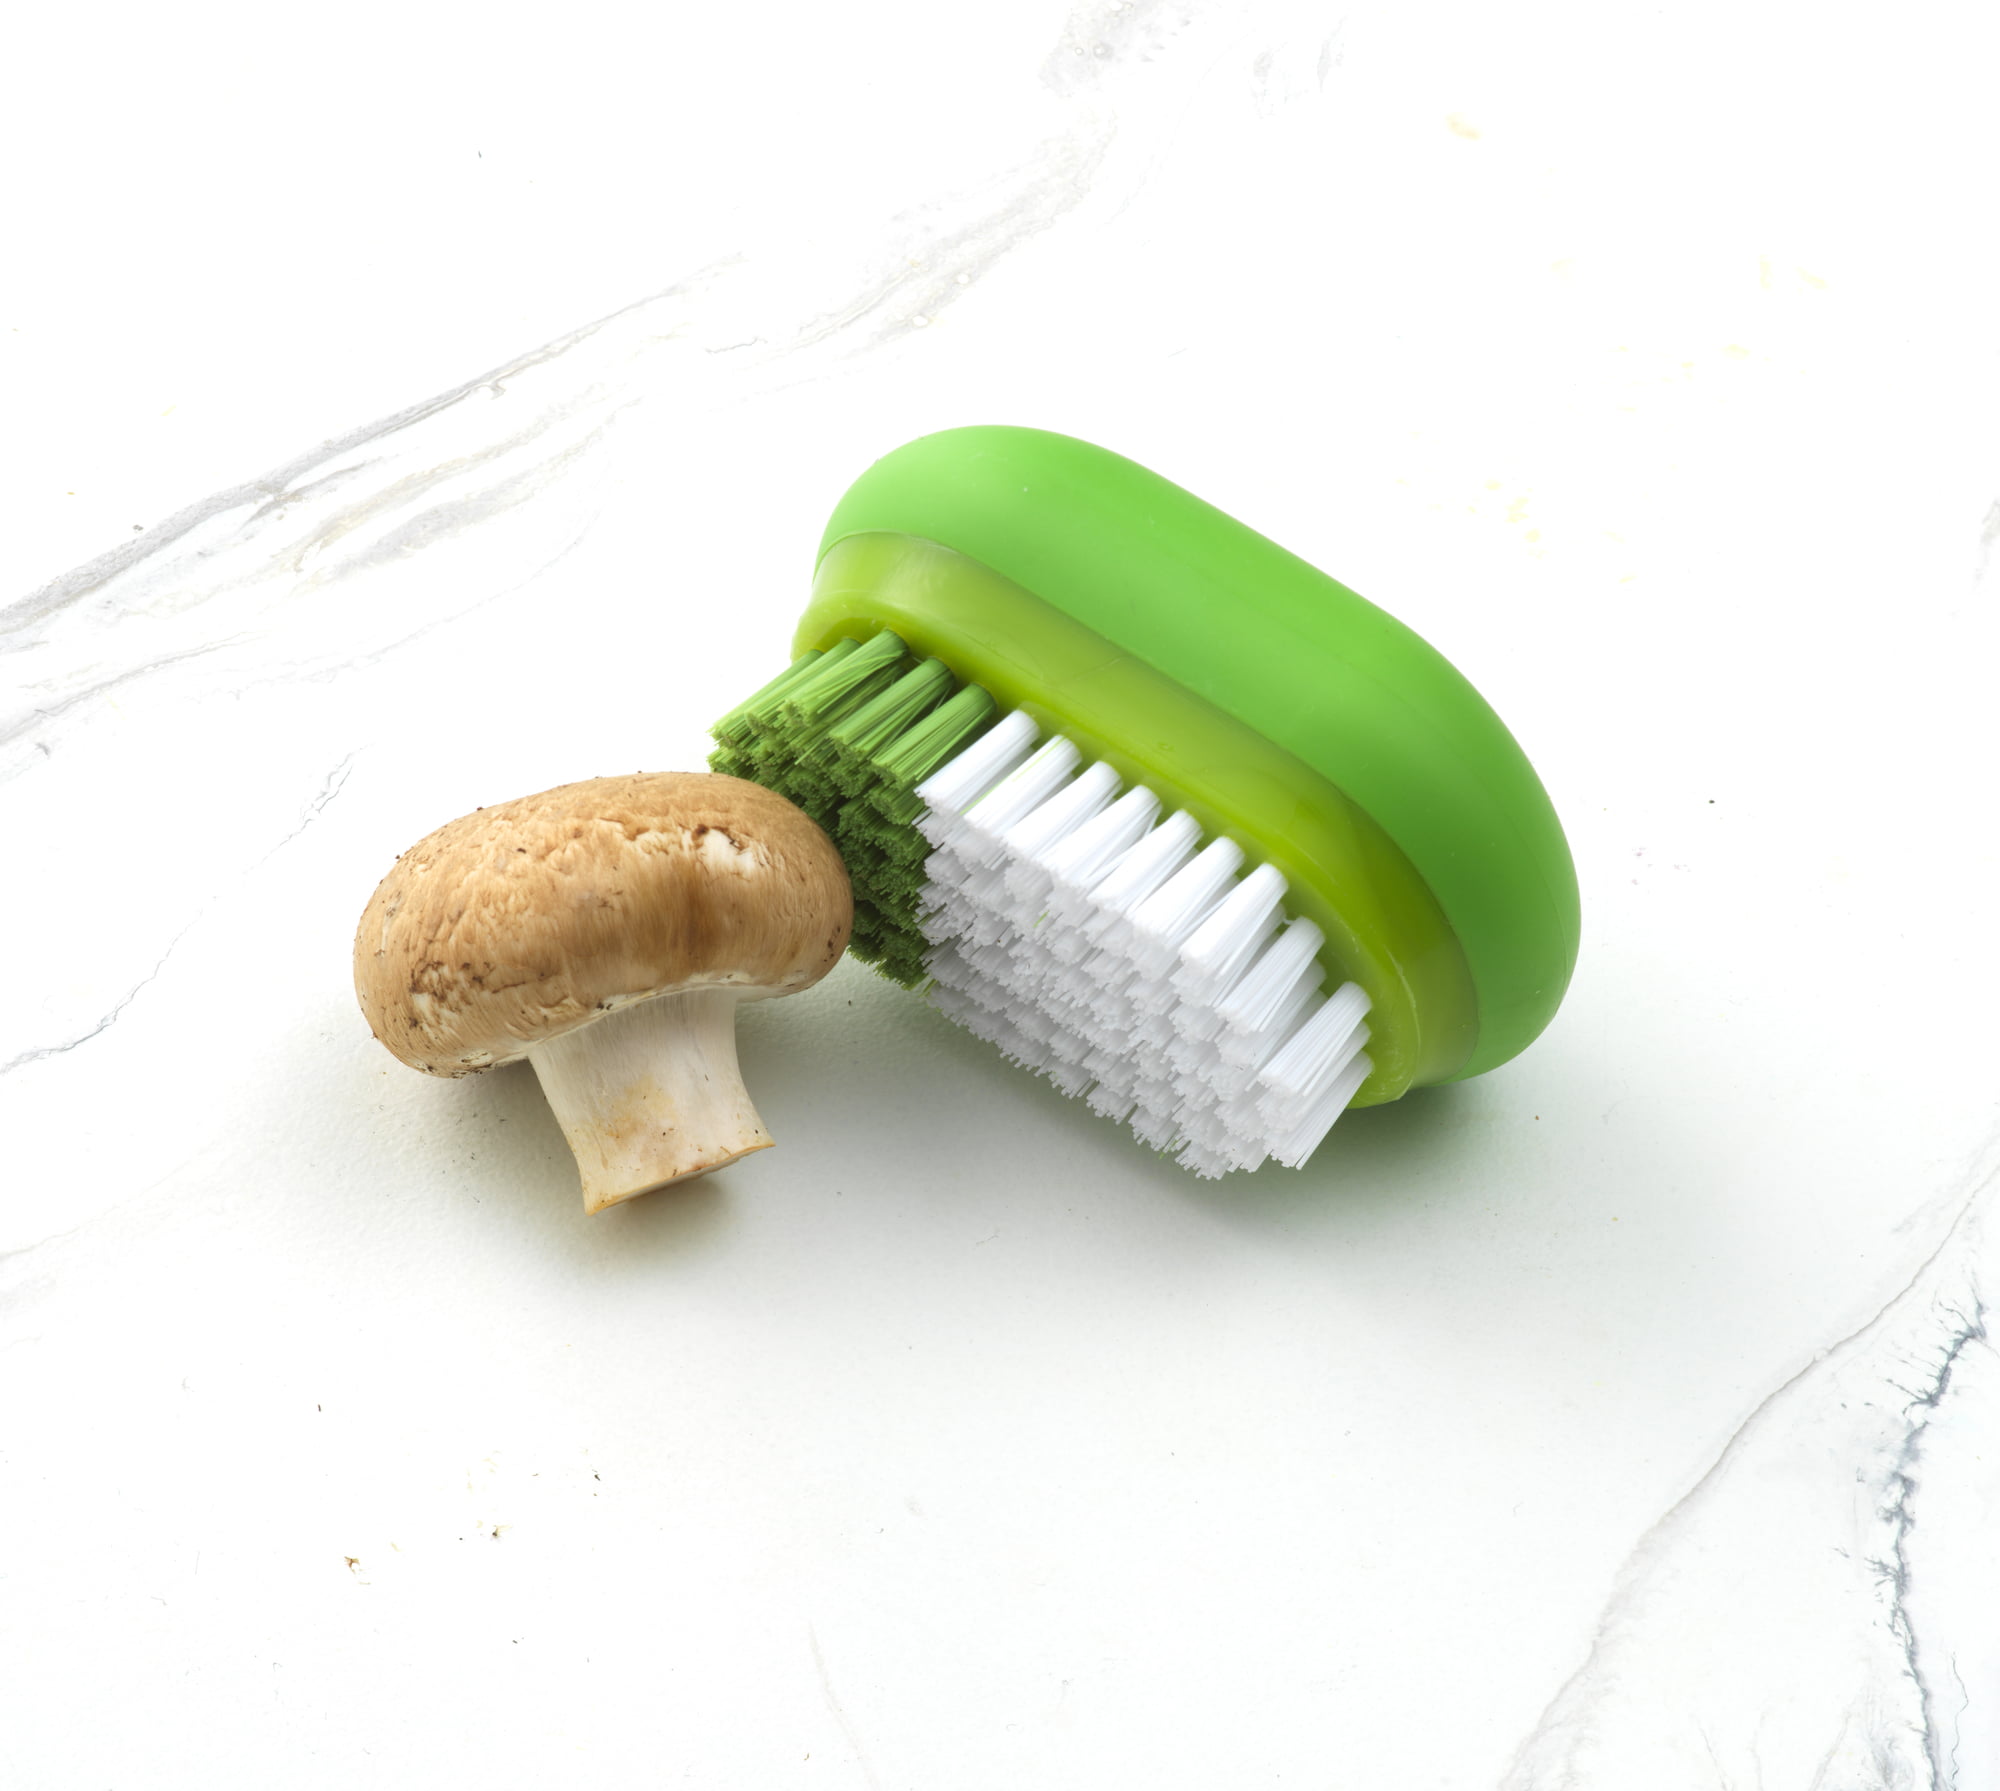 Cylindrical fruit and vegetable brush with green pexcrine bristles